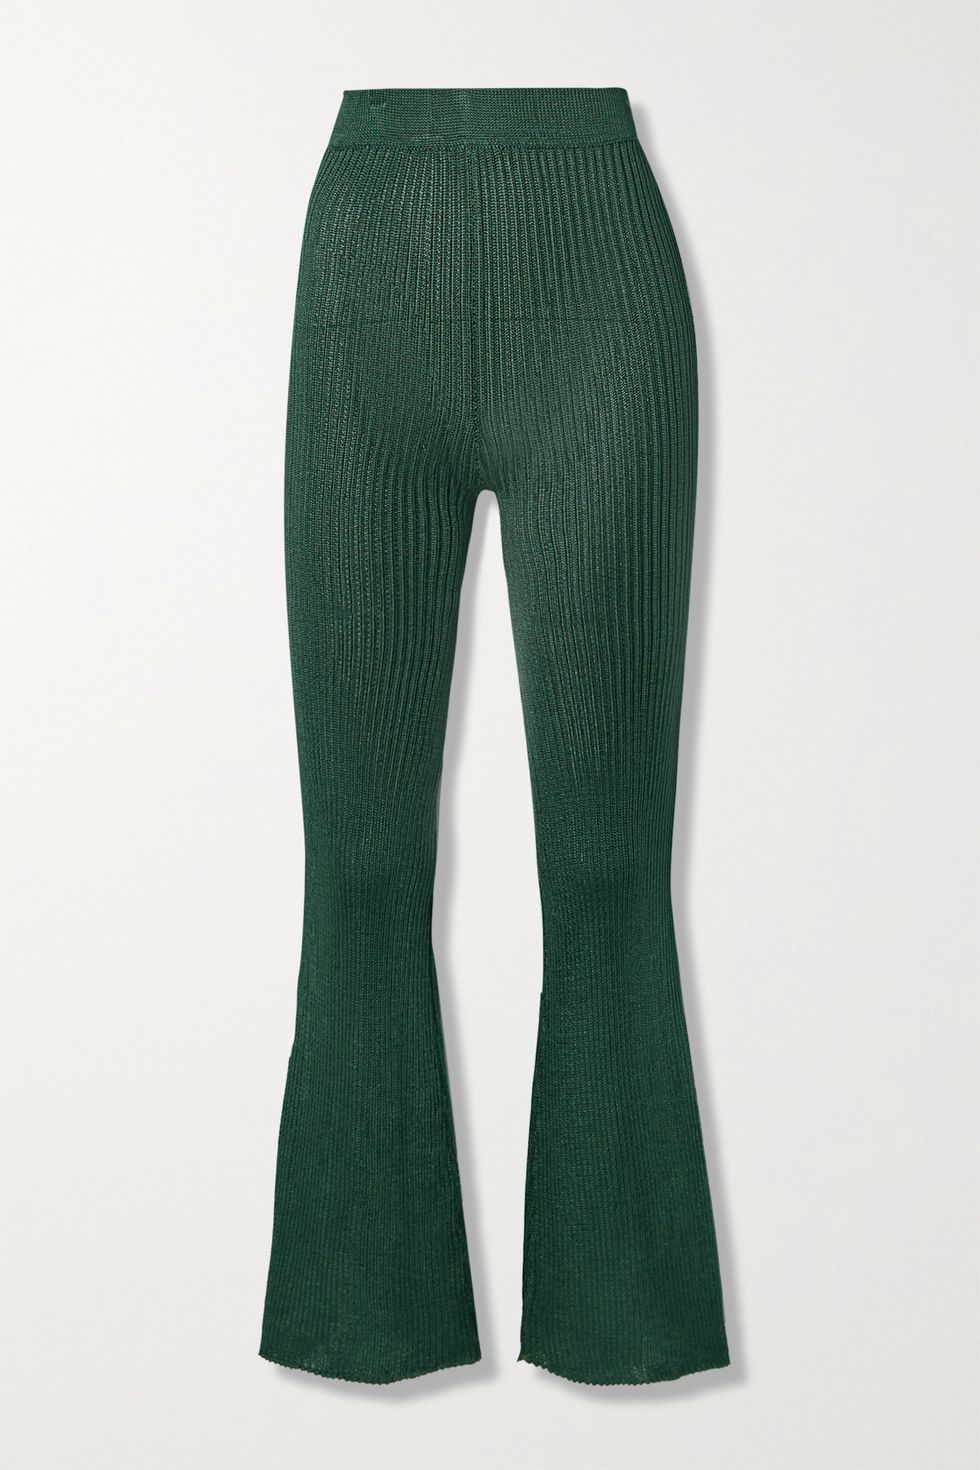 + NET SUSTAIN ribbed-knit flared pants